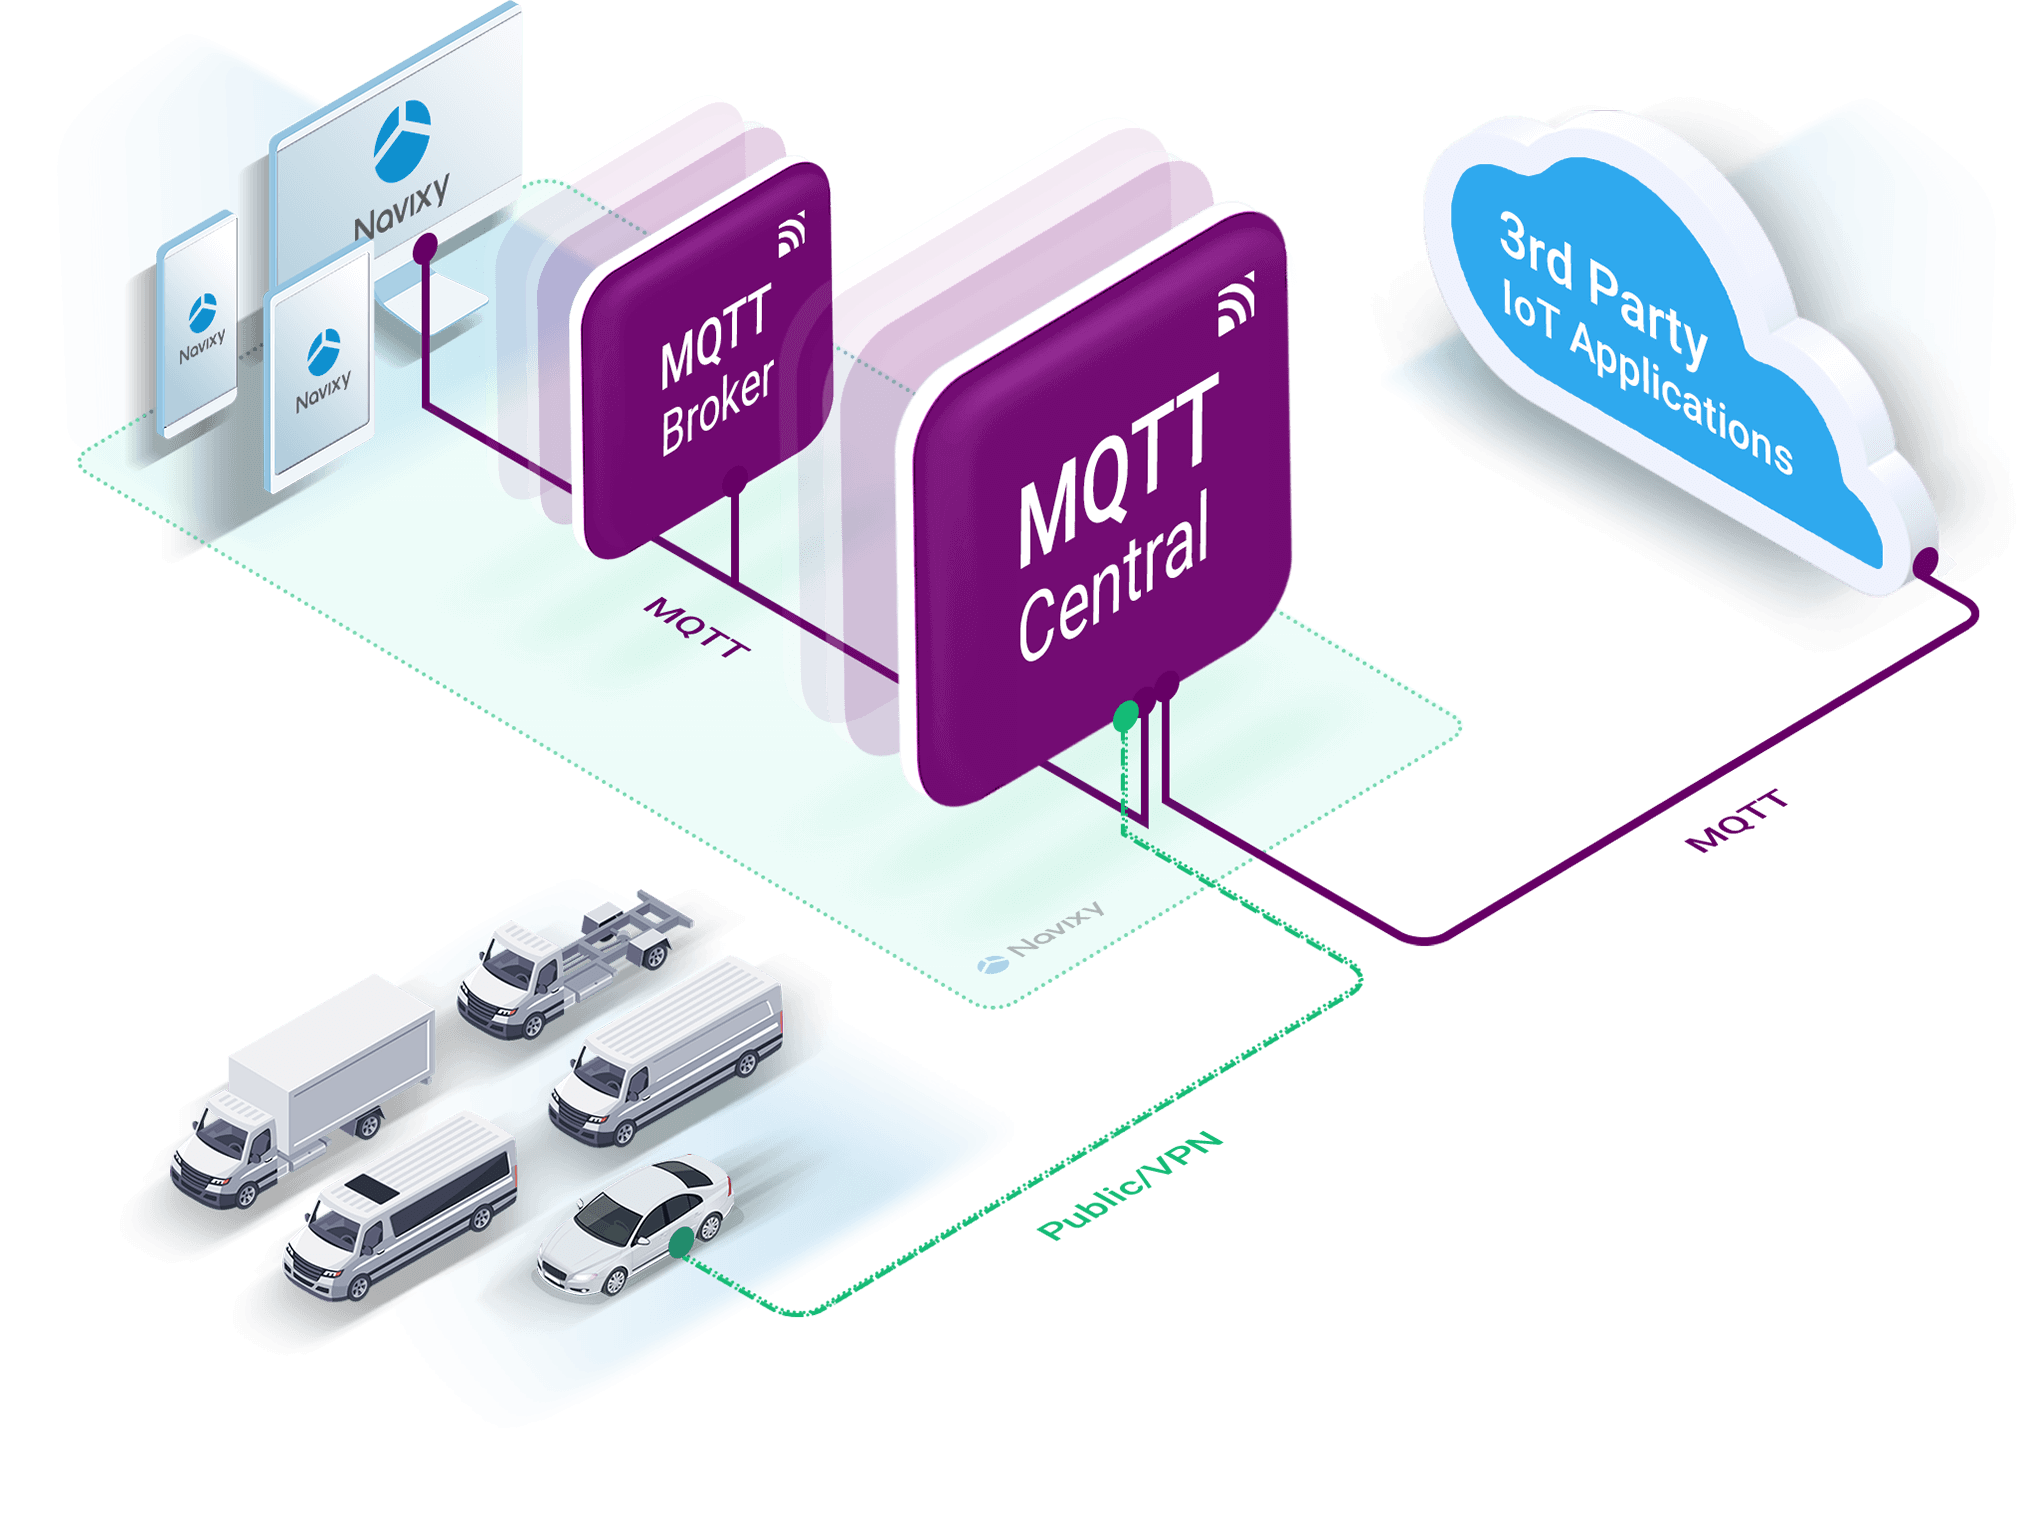 Build IoT networks by integrating your GPS tracking system with Navixy MQTT